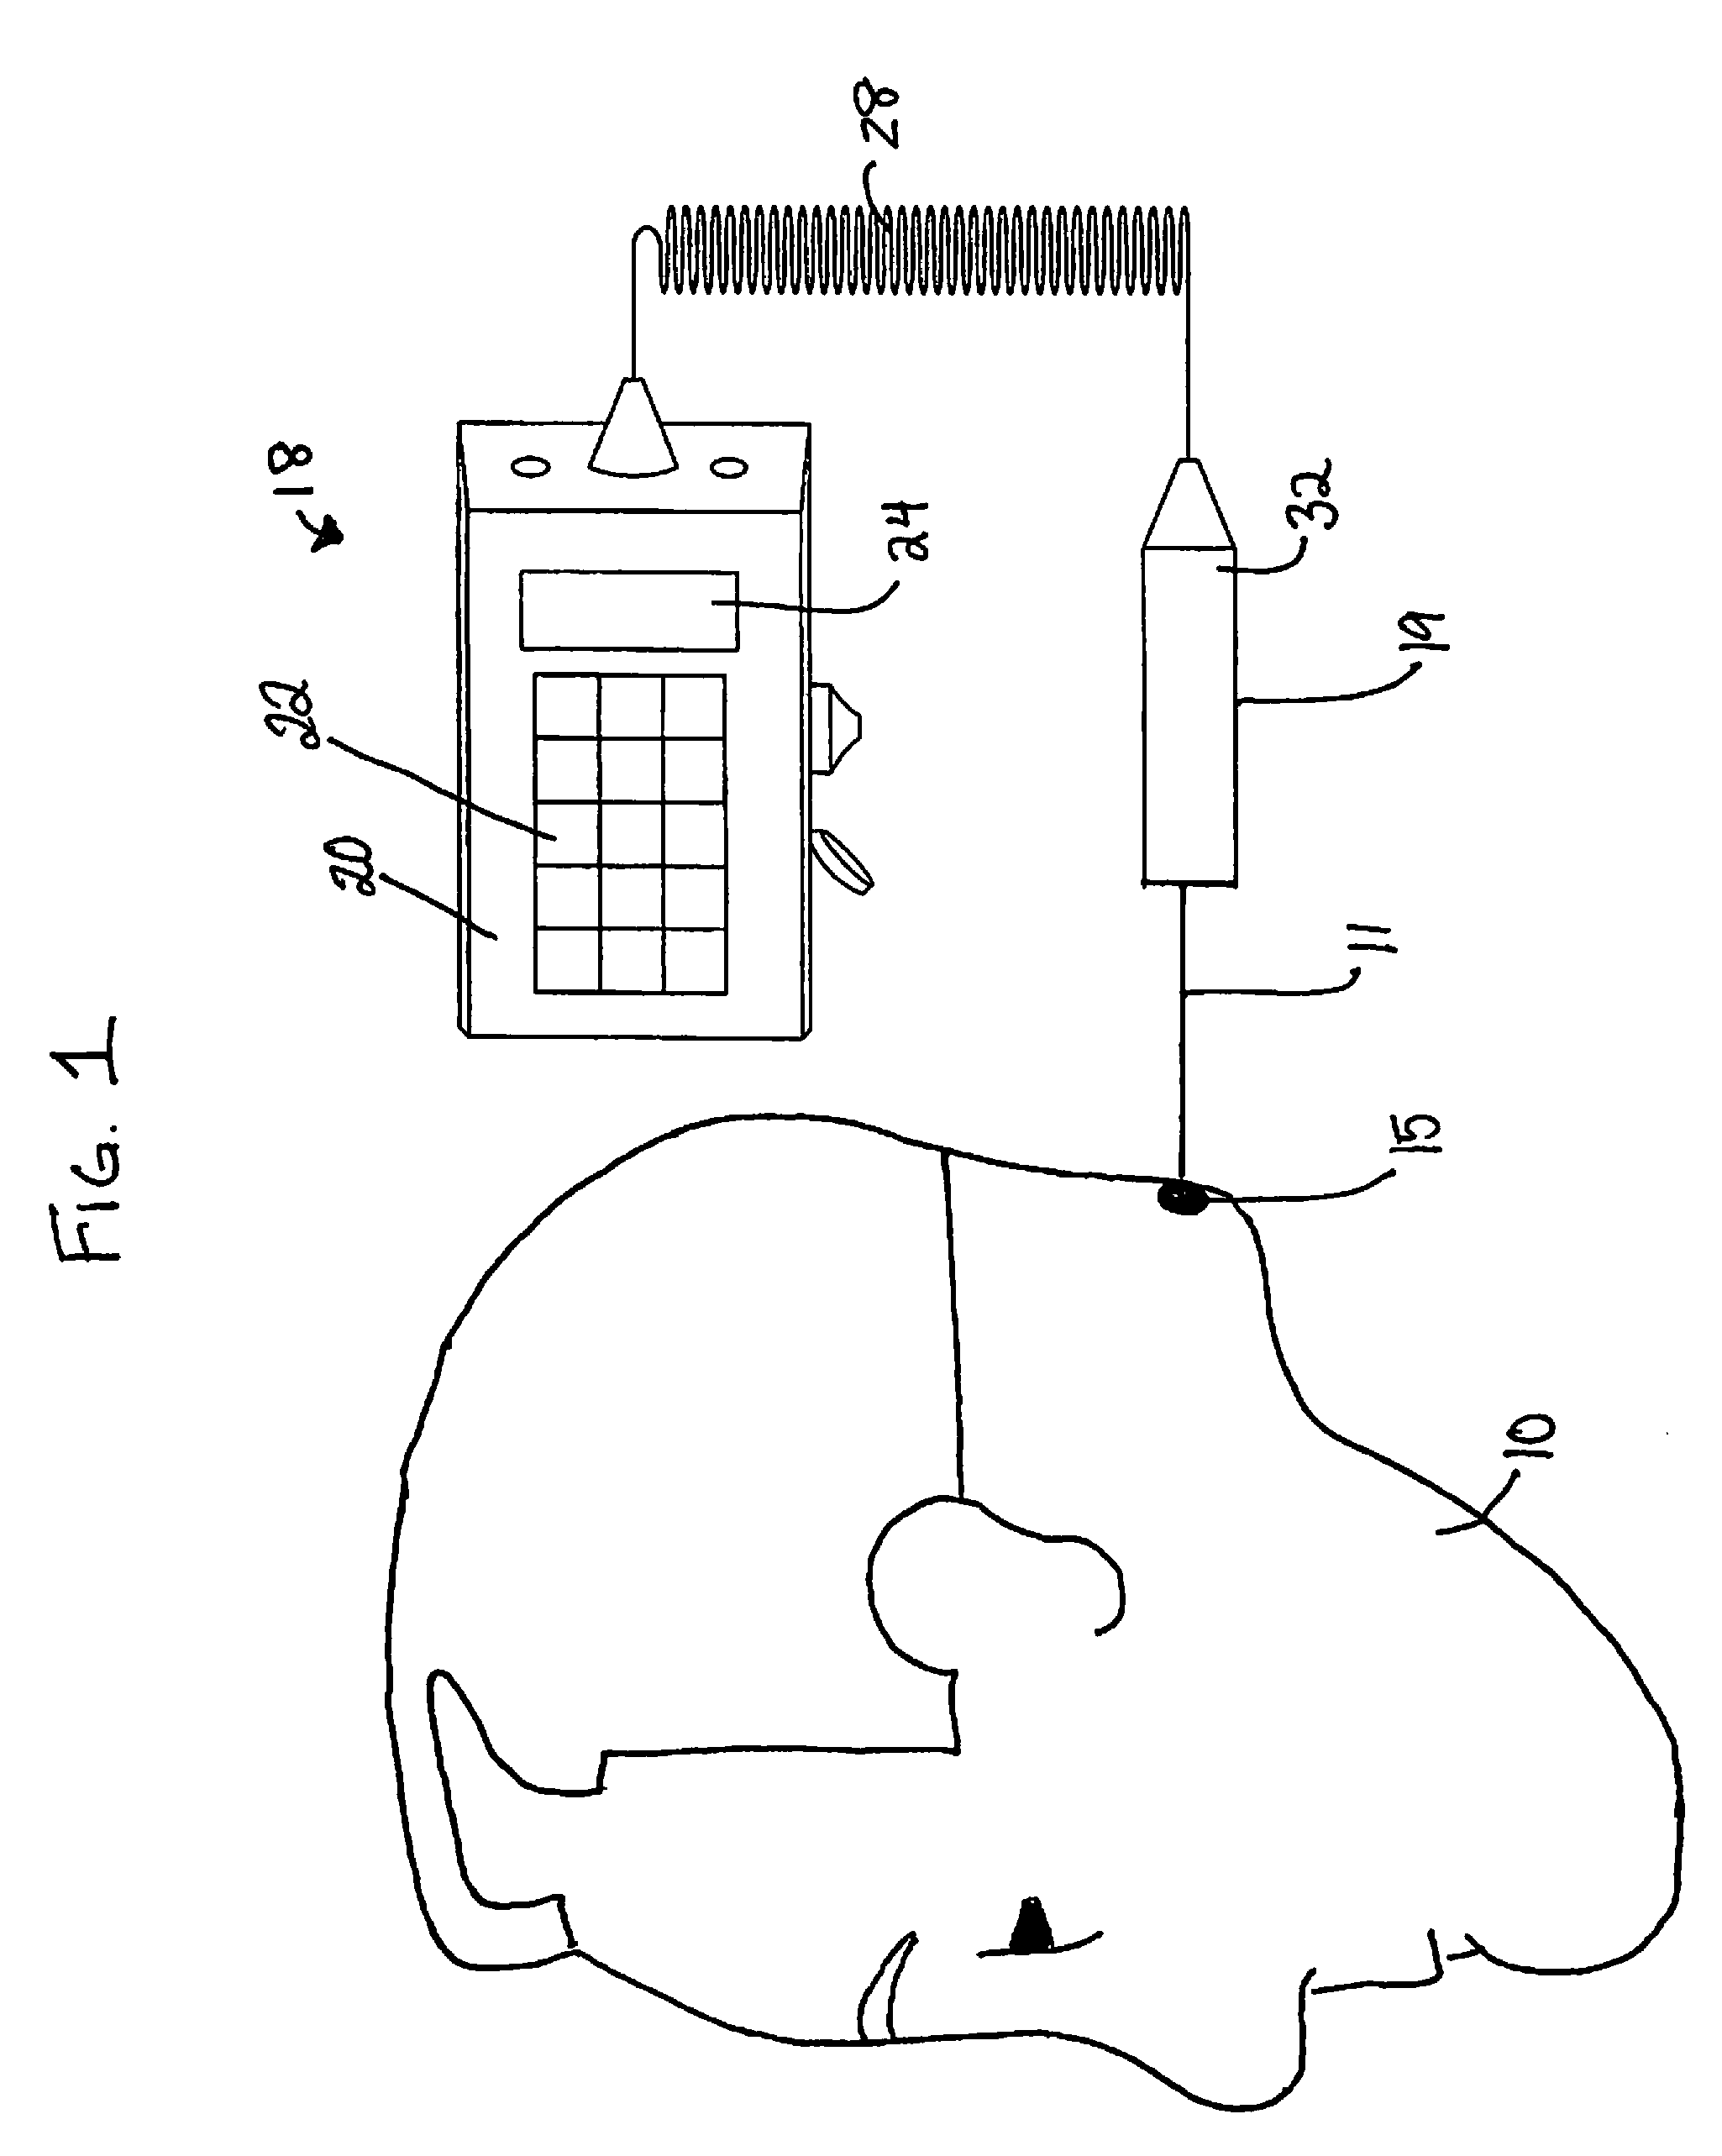 Adjustable Polarity Laser Device and Polarized Low-Level Laser Therapy Method